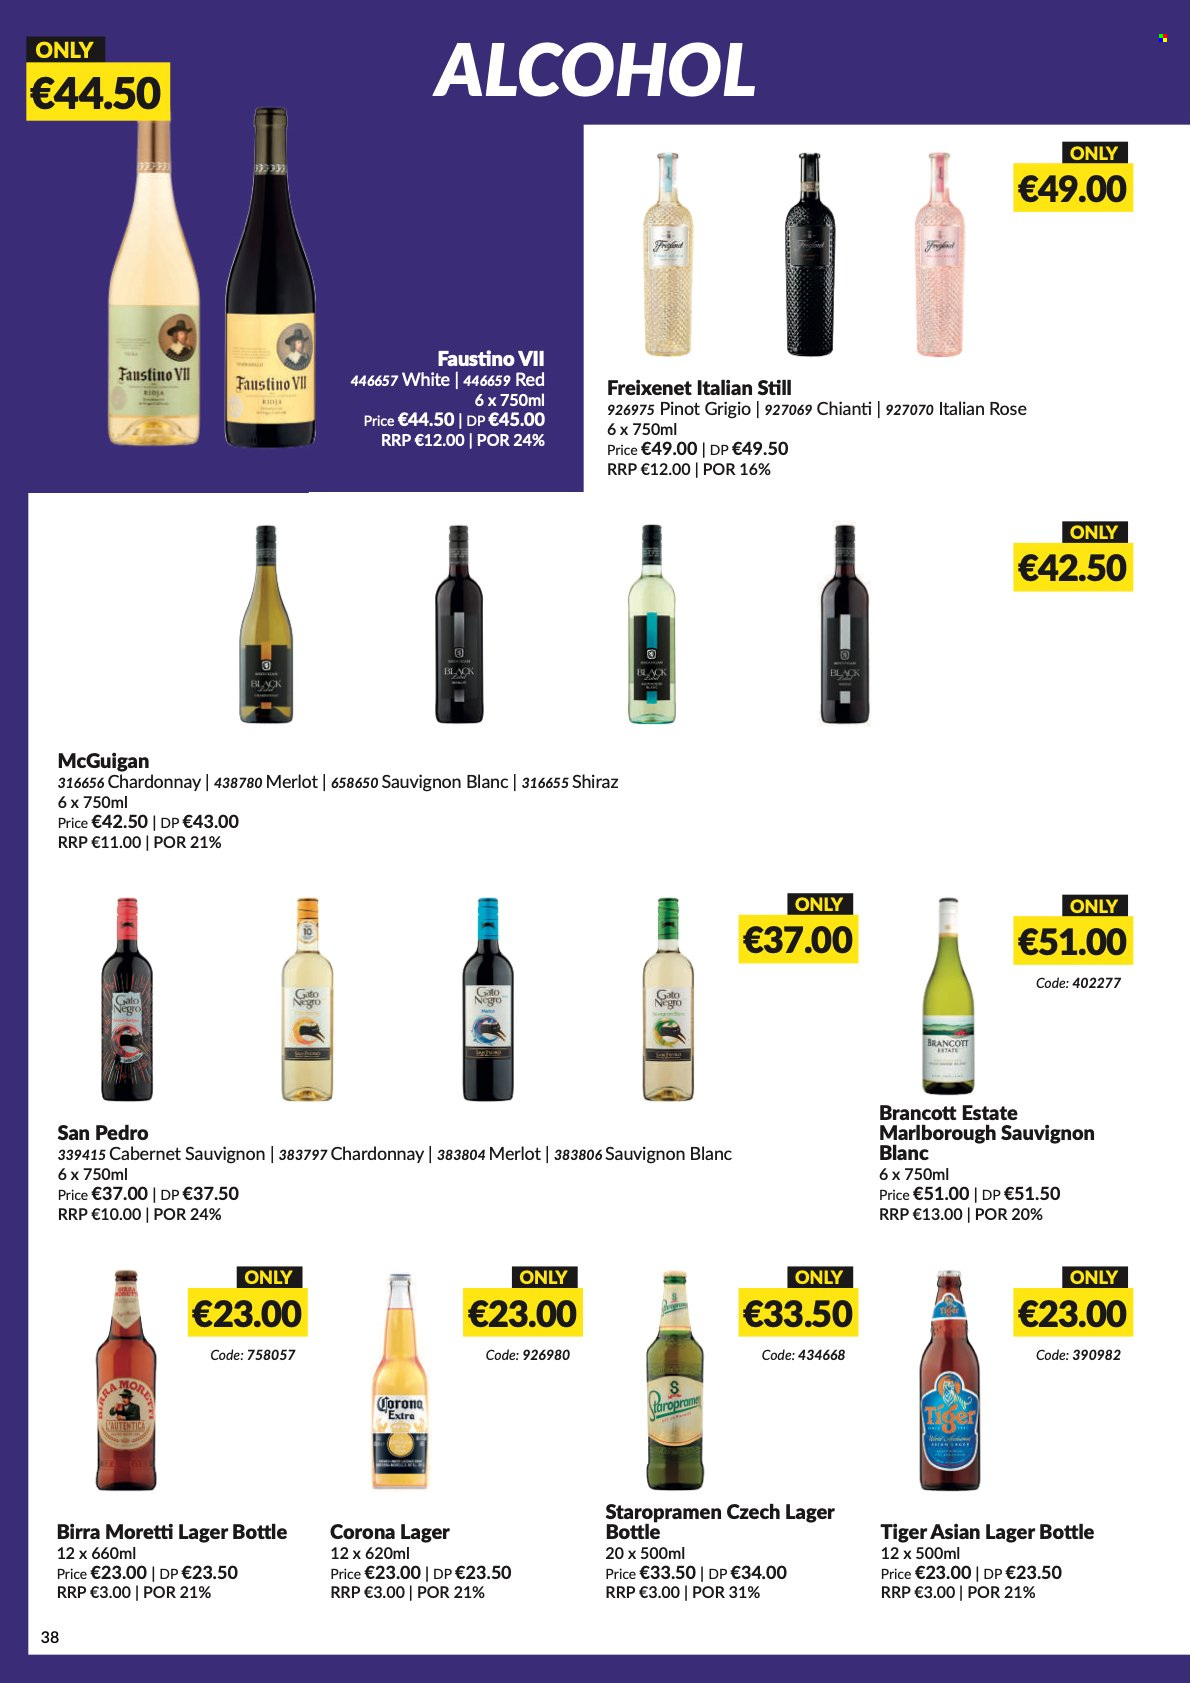 thumbnail - MUSGRAVE Market Place offer  - 08.05.2022 - 04.06.2022 - Sales products - Cabernet Sauvignon, red wine, white wine, Chardonnay, wine, Merlot, alcohol, Shiraz, Pinot Grigio, Sauvignon Blanc, rosé wine, beer, Corona Extra, Lager, rose. Page 39.